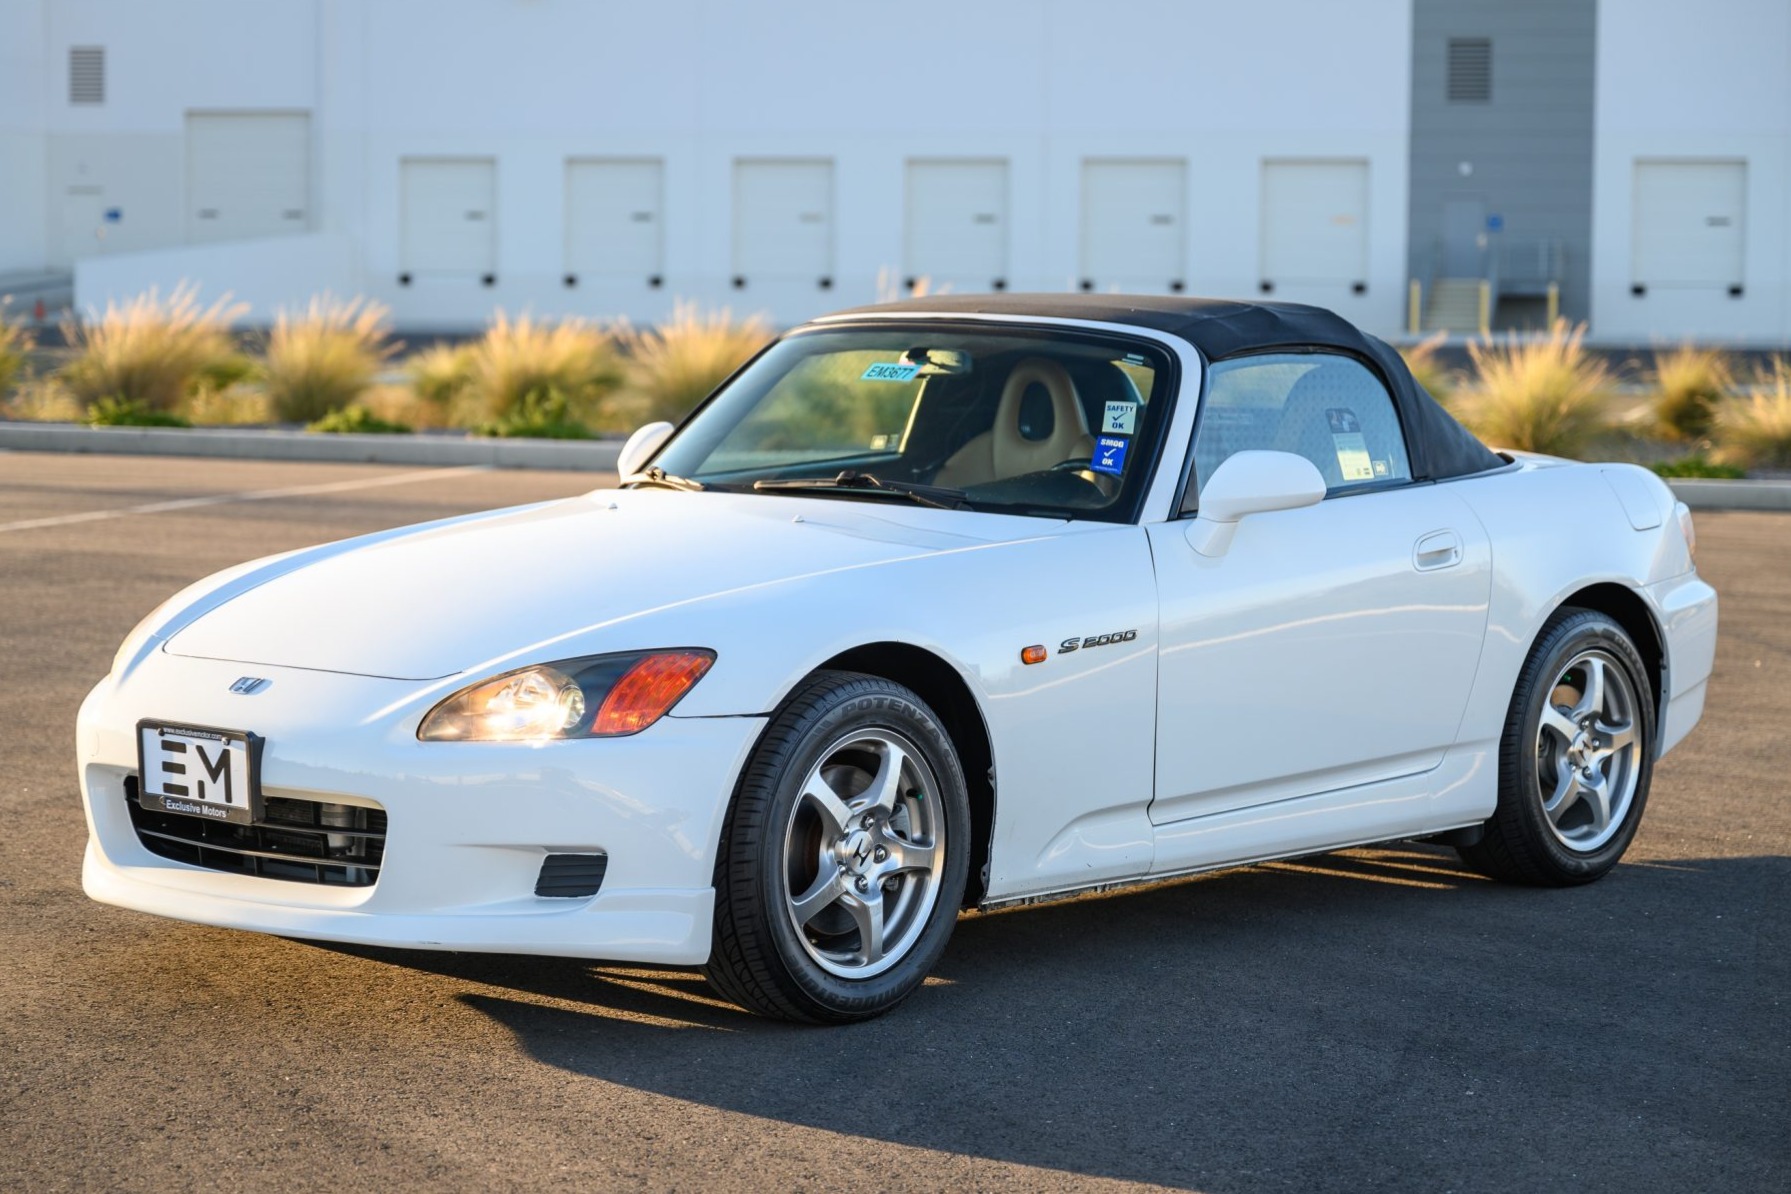 Used 2003 Honda S2000 Review